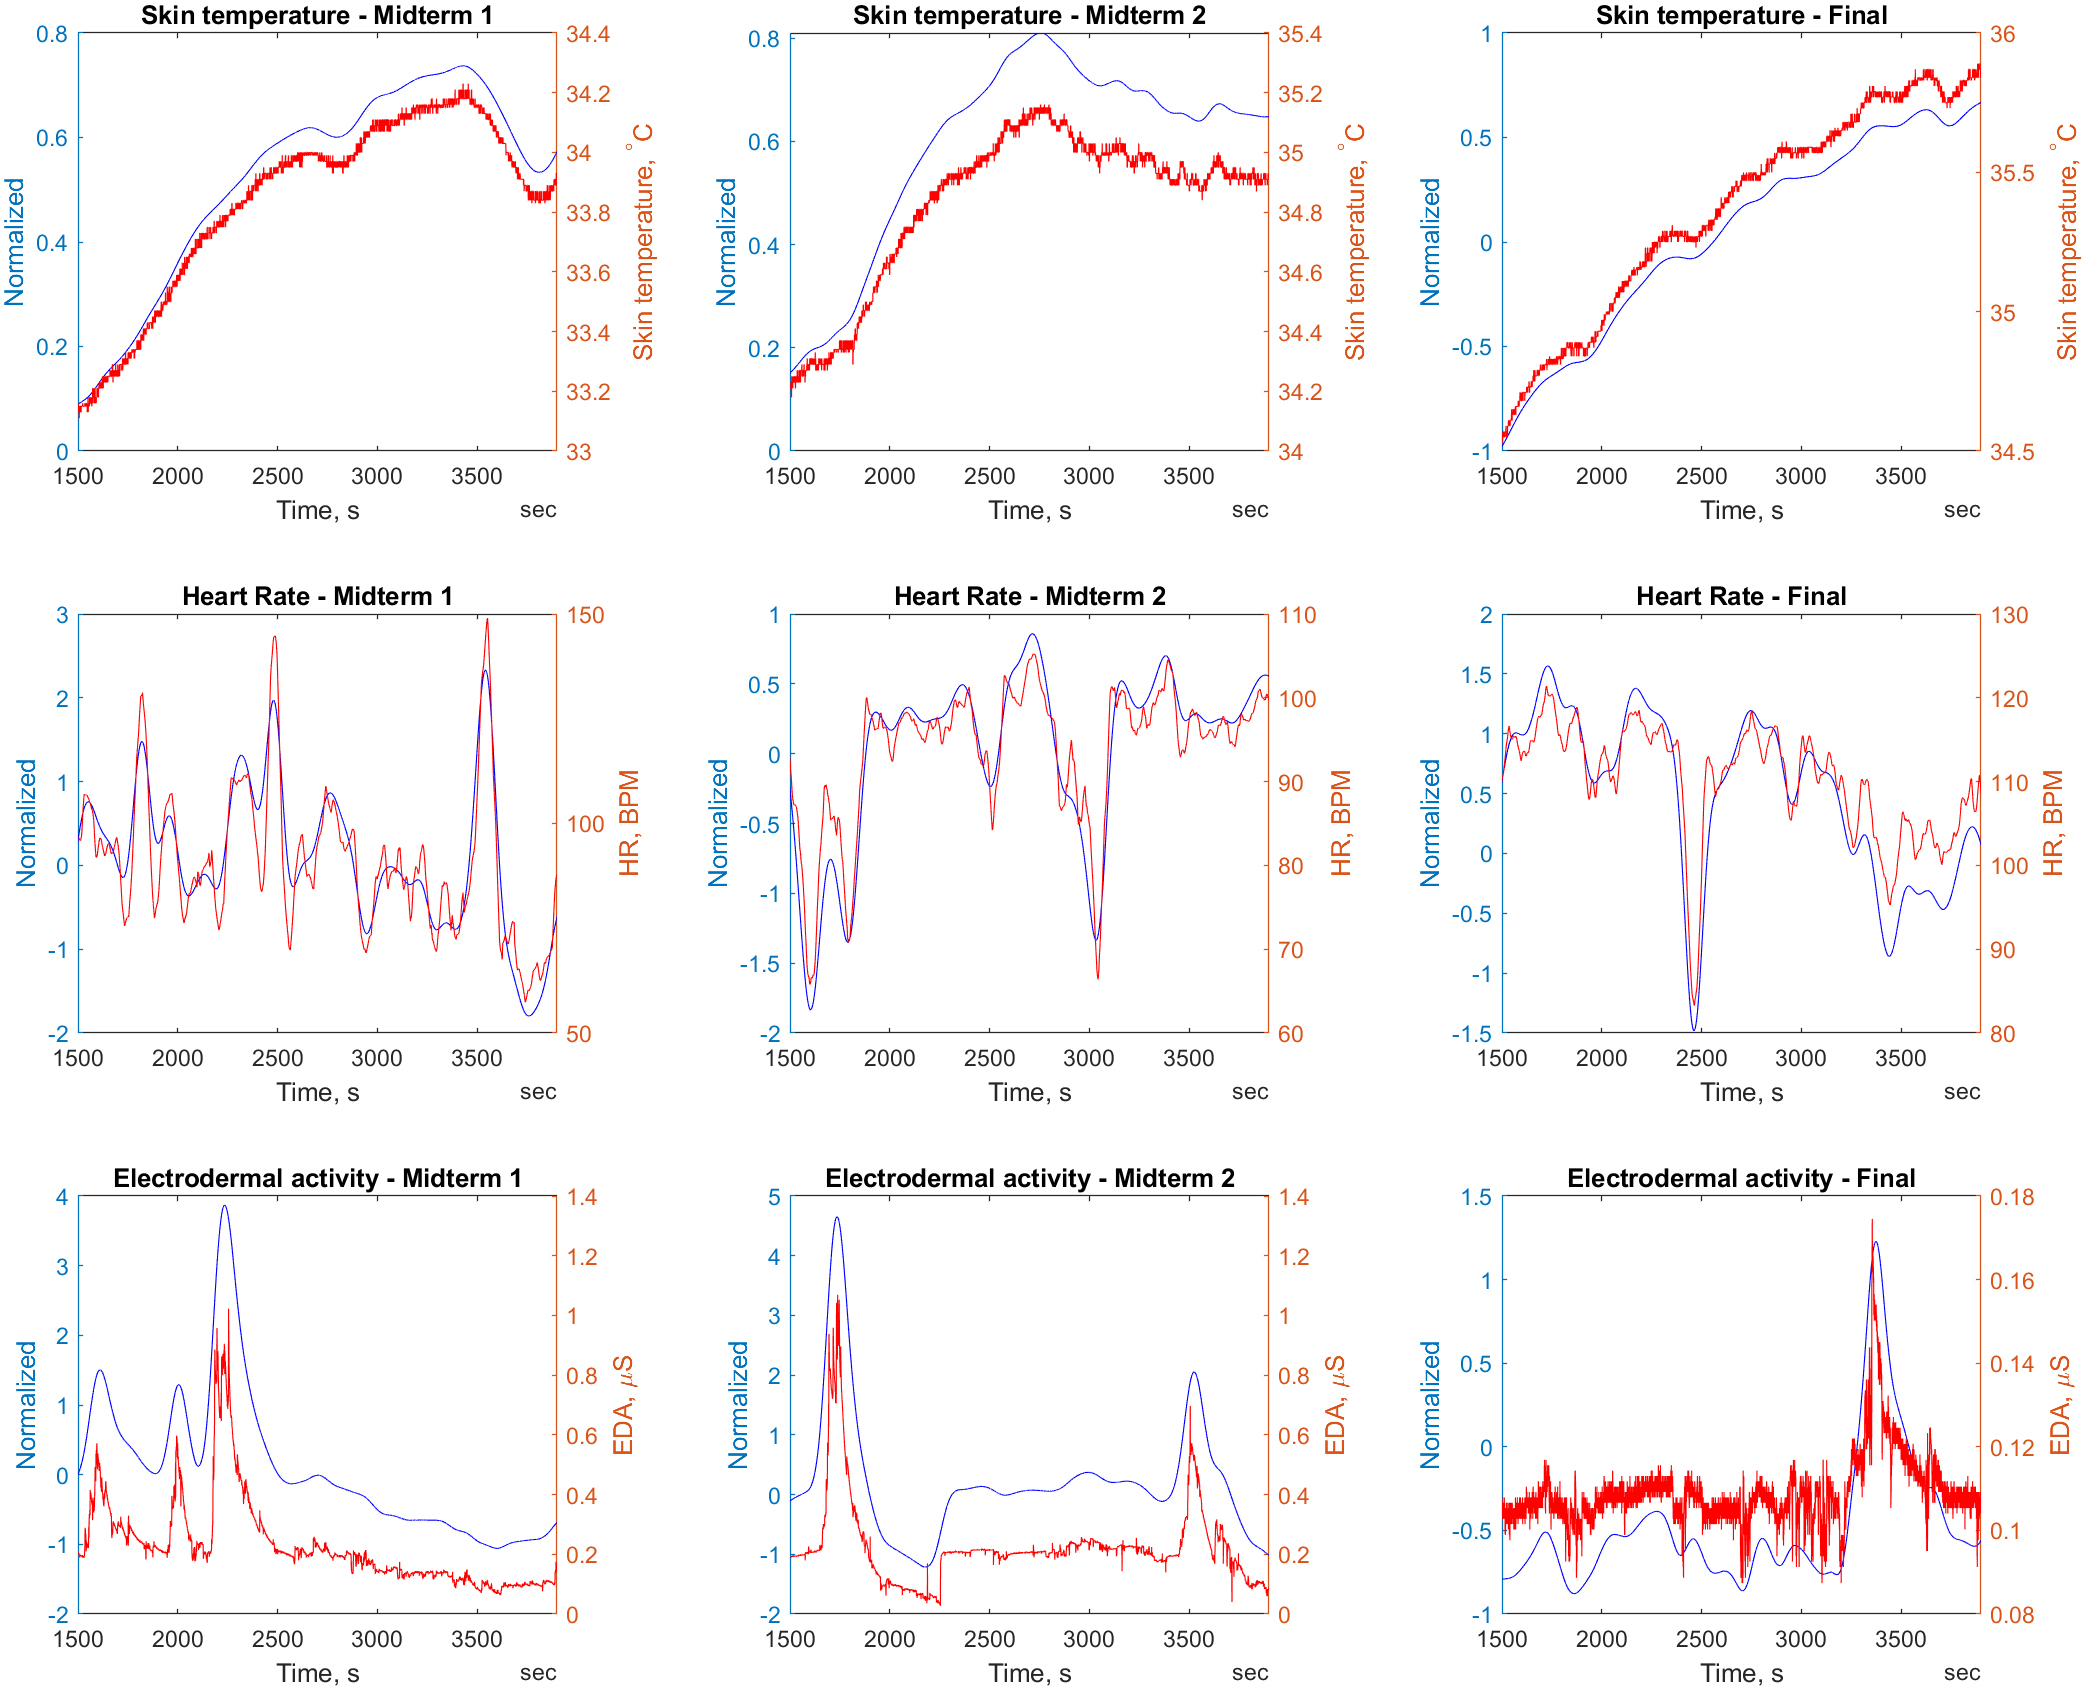 Comparison of preprocessed (blue) and raw (red) signals: temperature, heart rate and electrodermal activity during examination. Each subplot shows a 40-minute window for different examinations, showing the results of preprocessing.